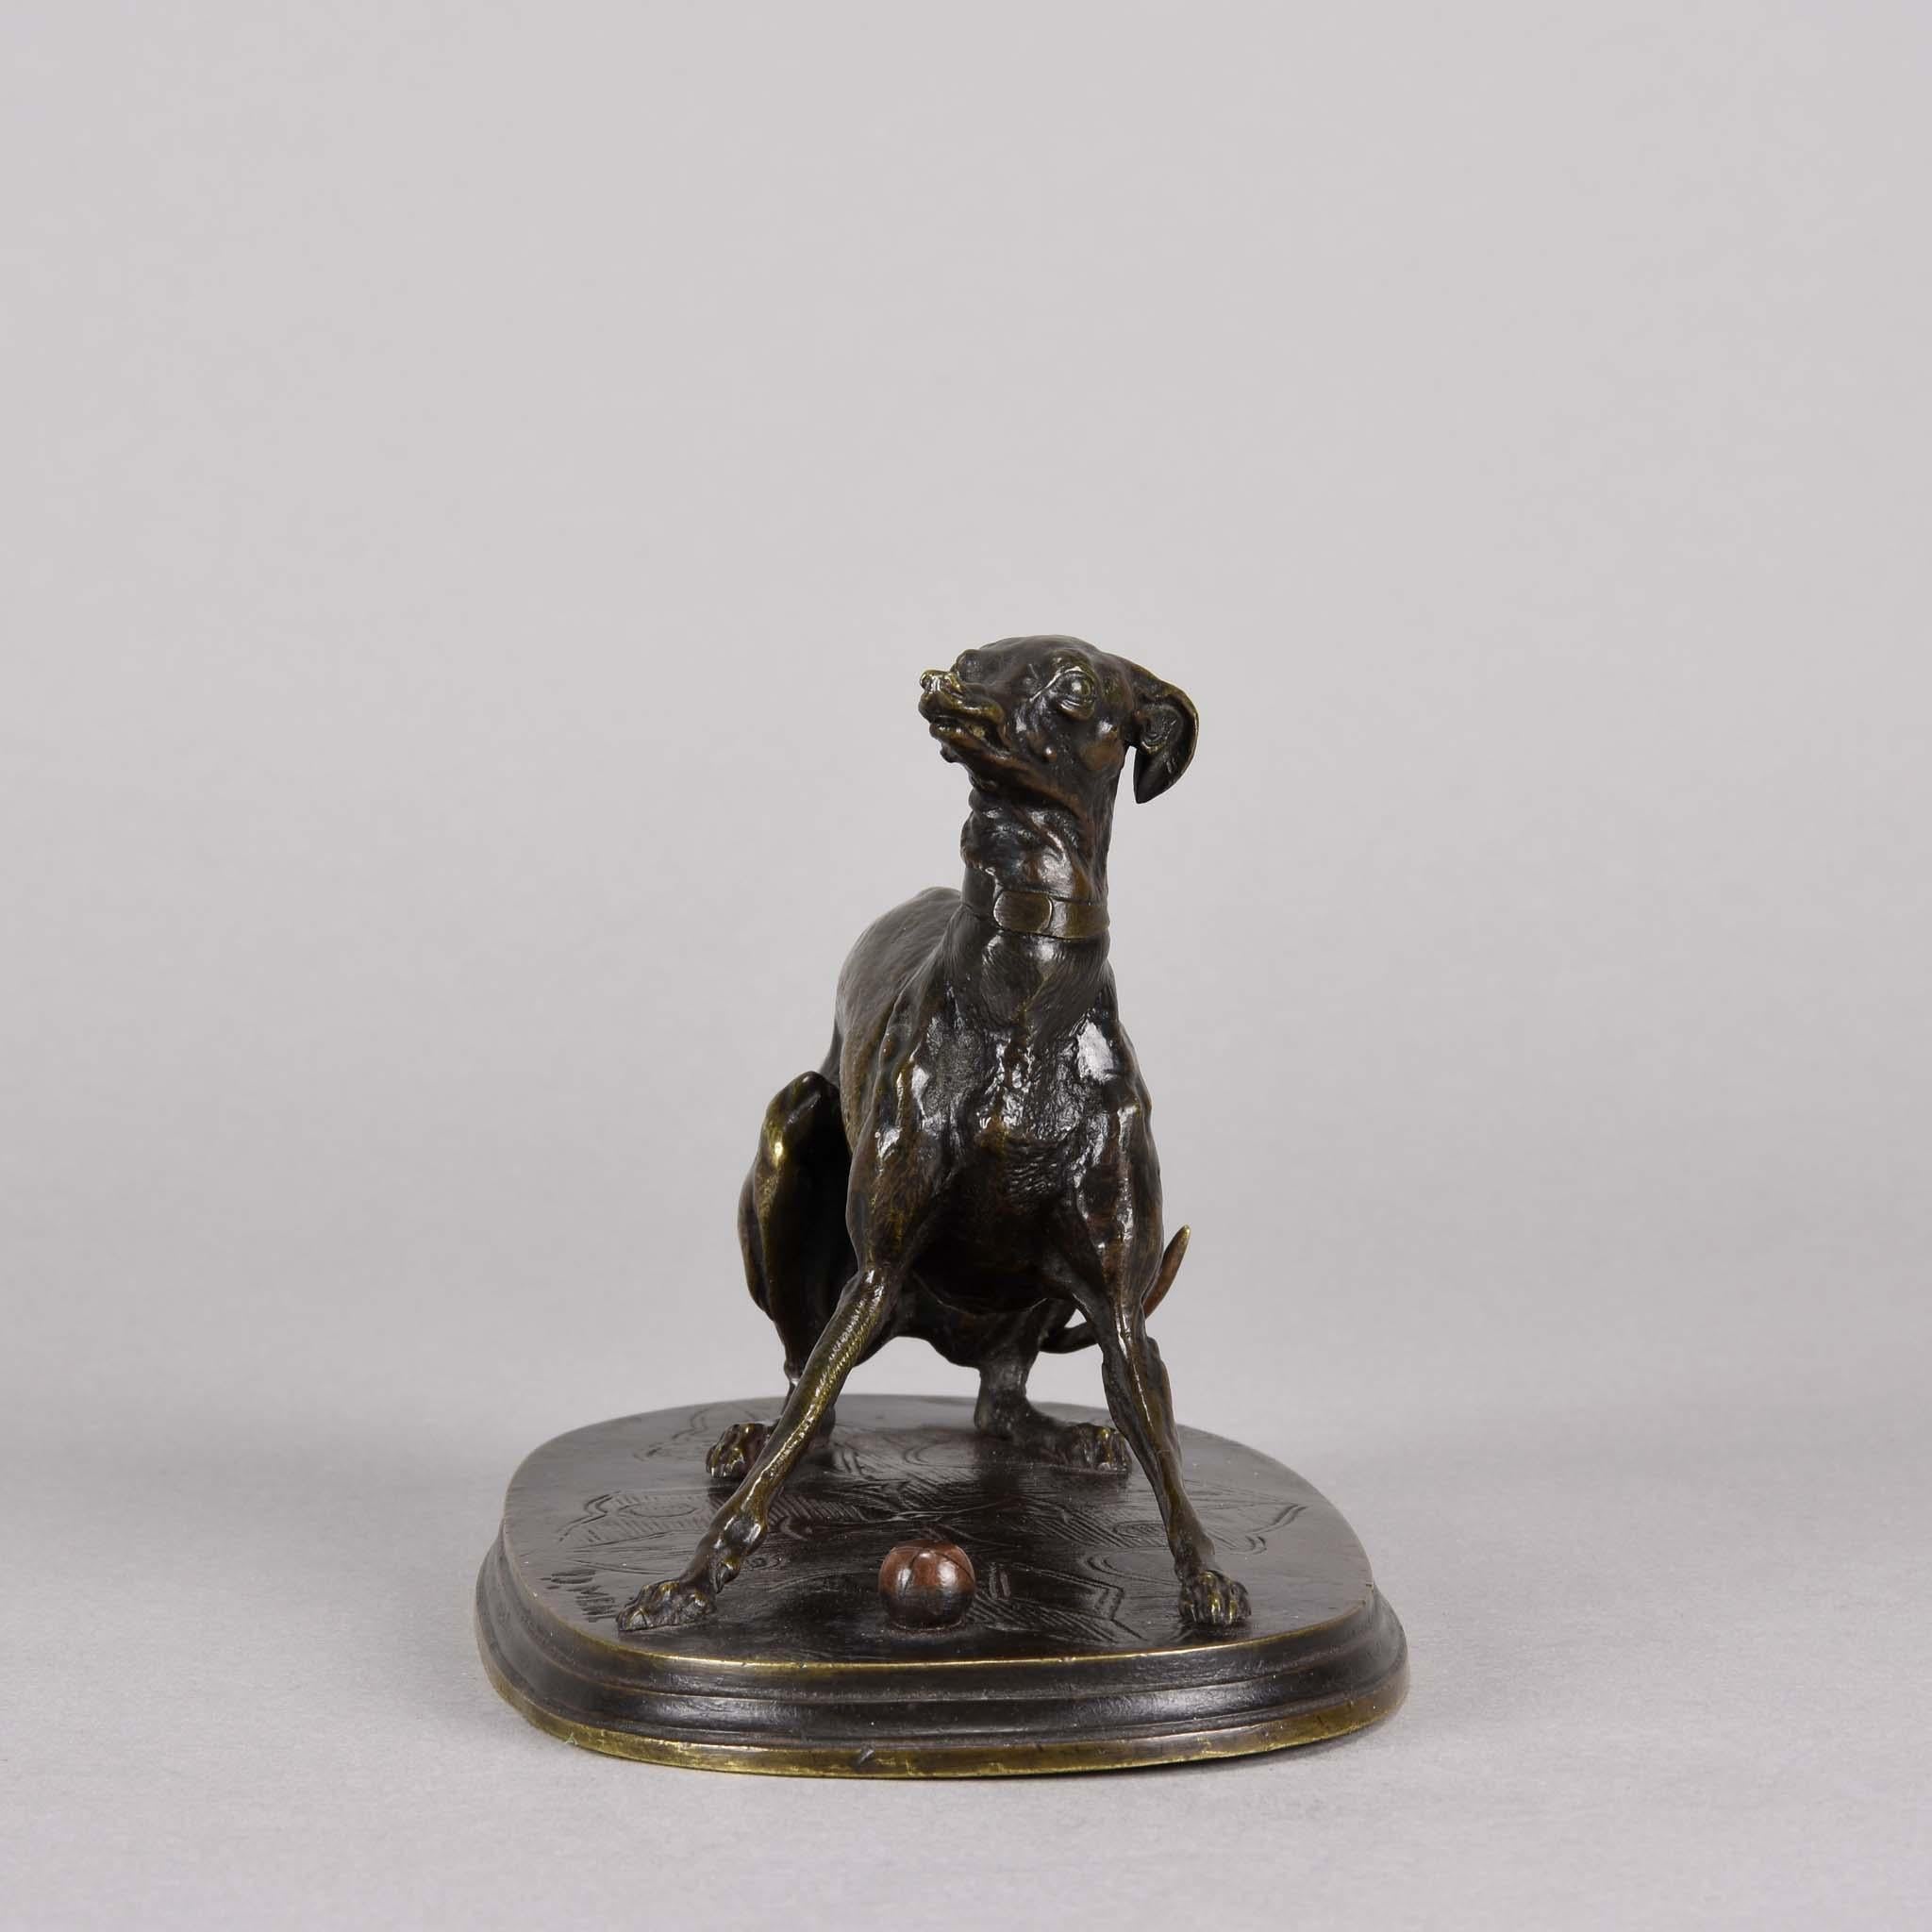 Delightful mid-19th century French Animaliers bronze study of a playful Whippet looking up in an attitude to play with a ball at her feet, with rich brown rubbed to a golden color and fine hand chased surface detail. Signed P J Mene and raised on a